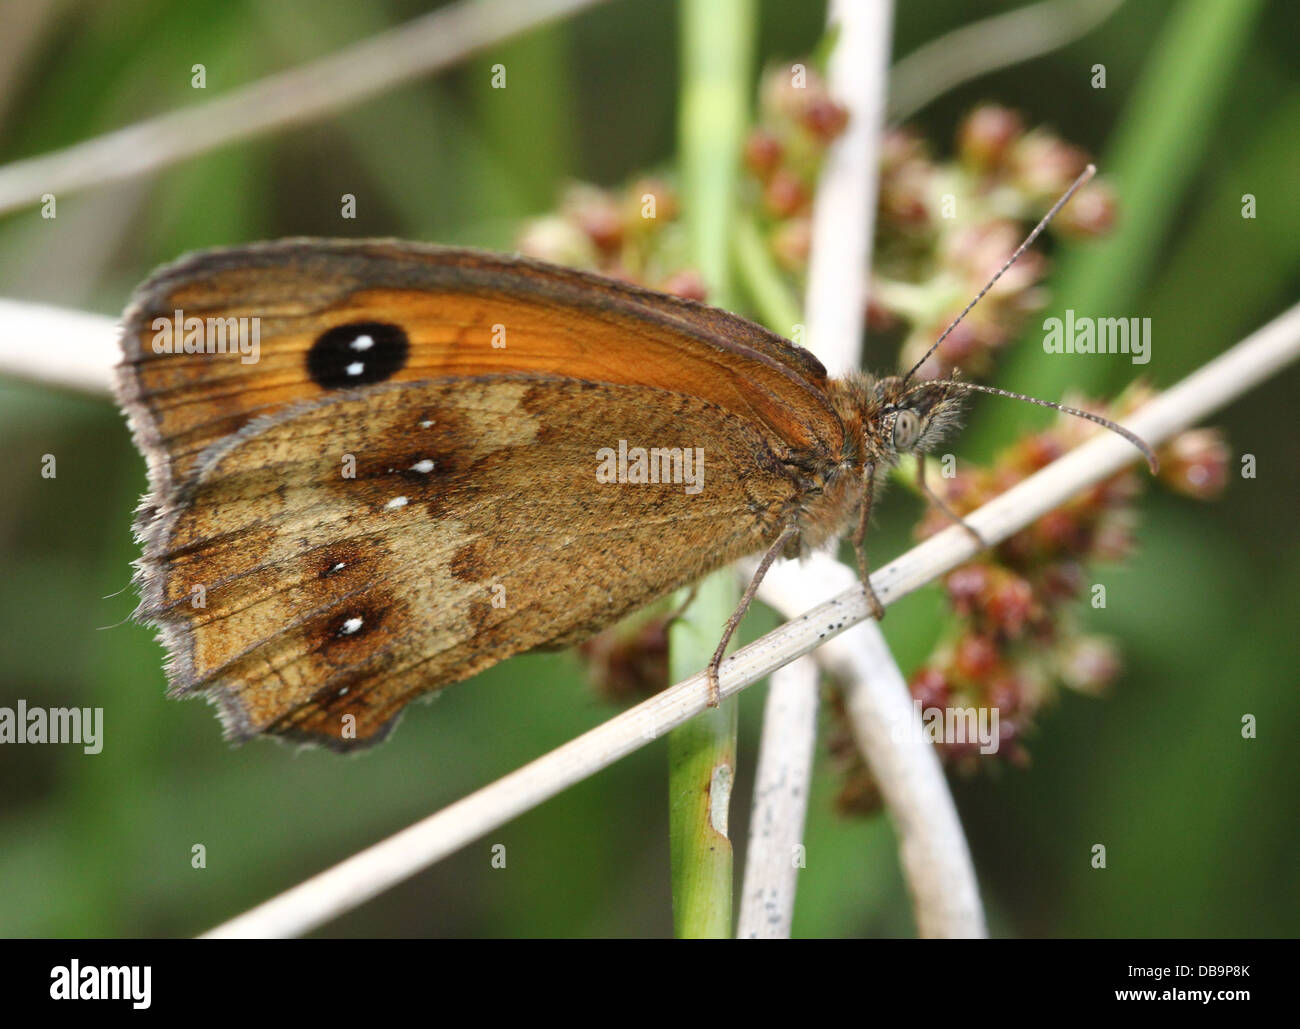 Macro of a Gatekeeper or  Hedge Brown butterfly (Pyronia tithonus) foraging on a flower Stock Photo